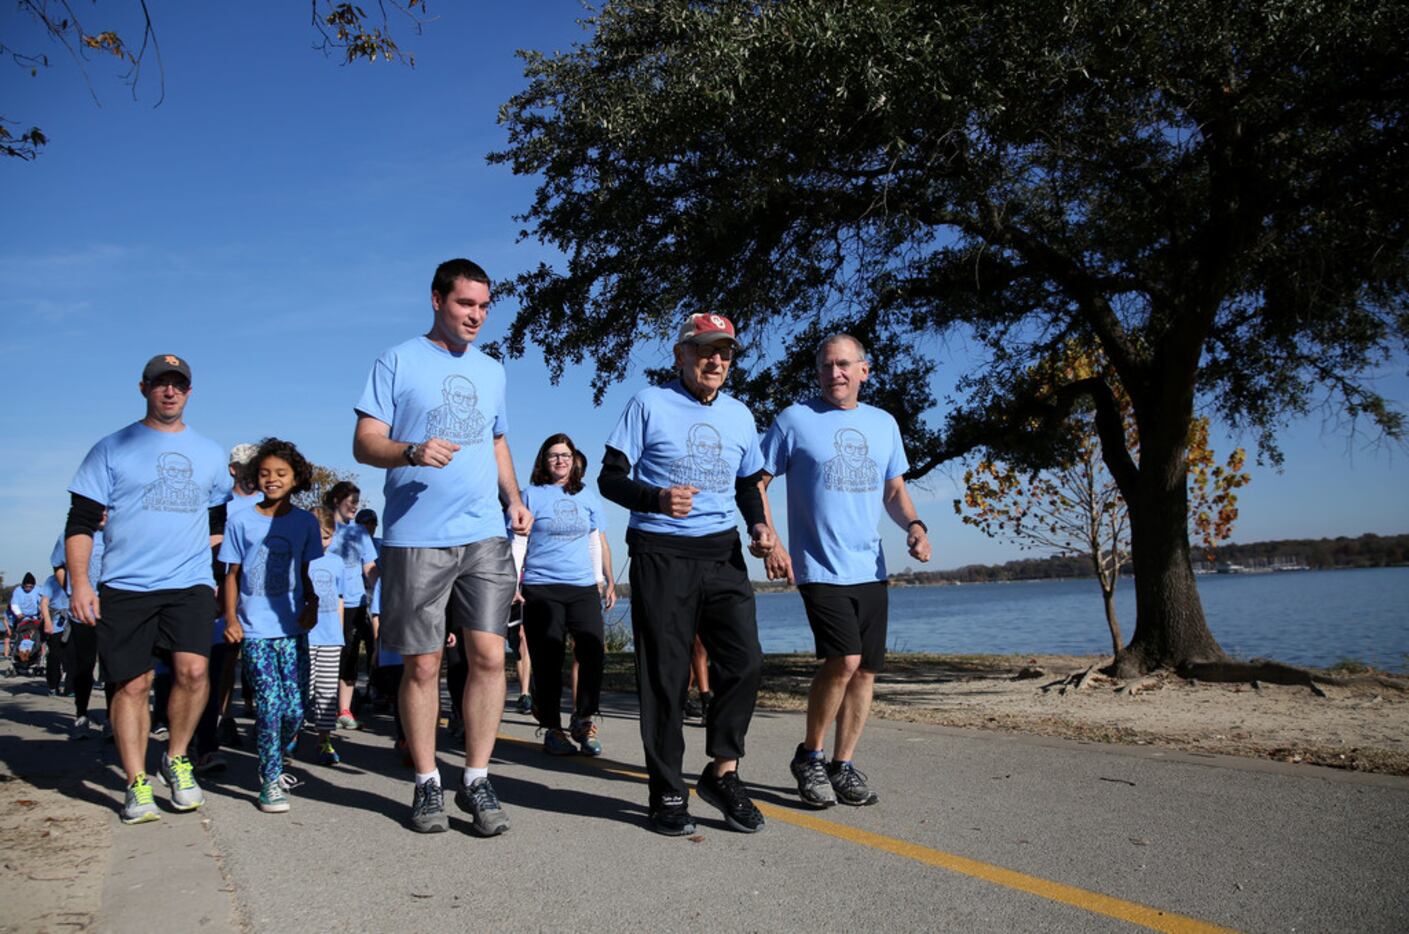 Orville Rogers, who is turning 100 years old, ran with his family near White Rock Lake in...